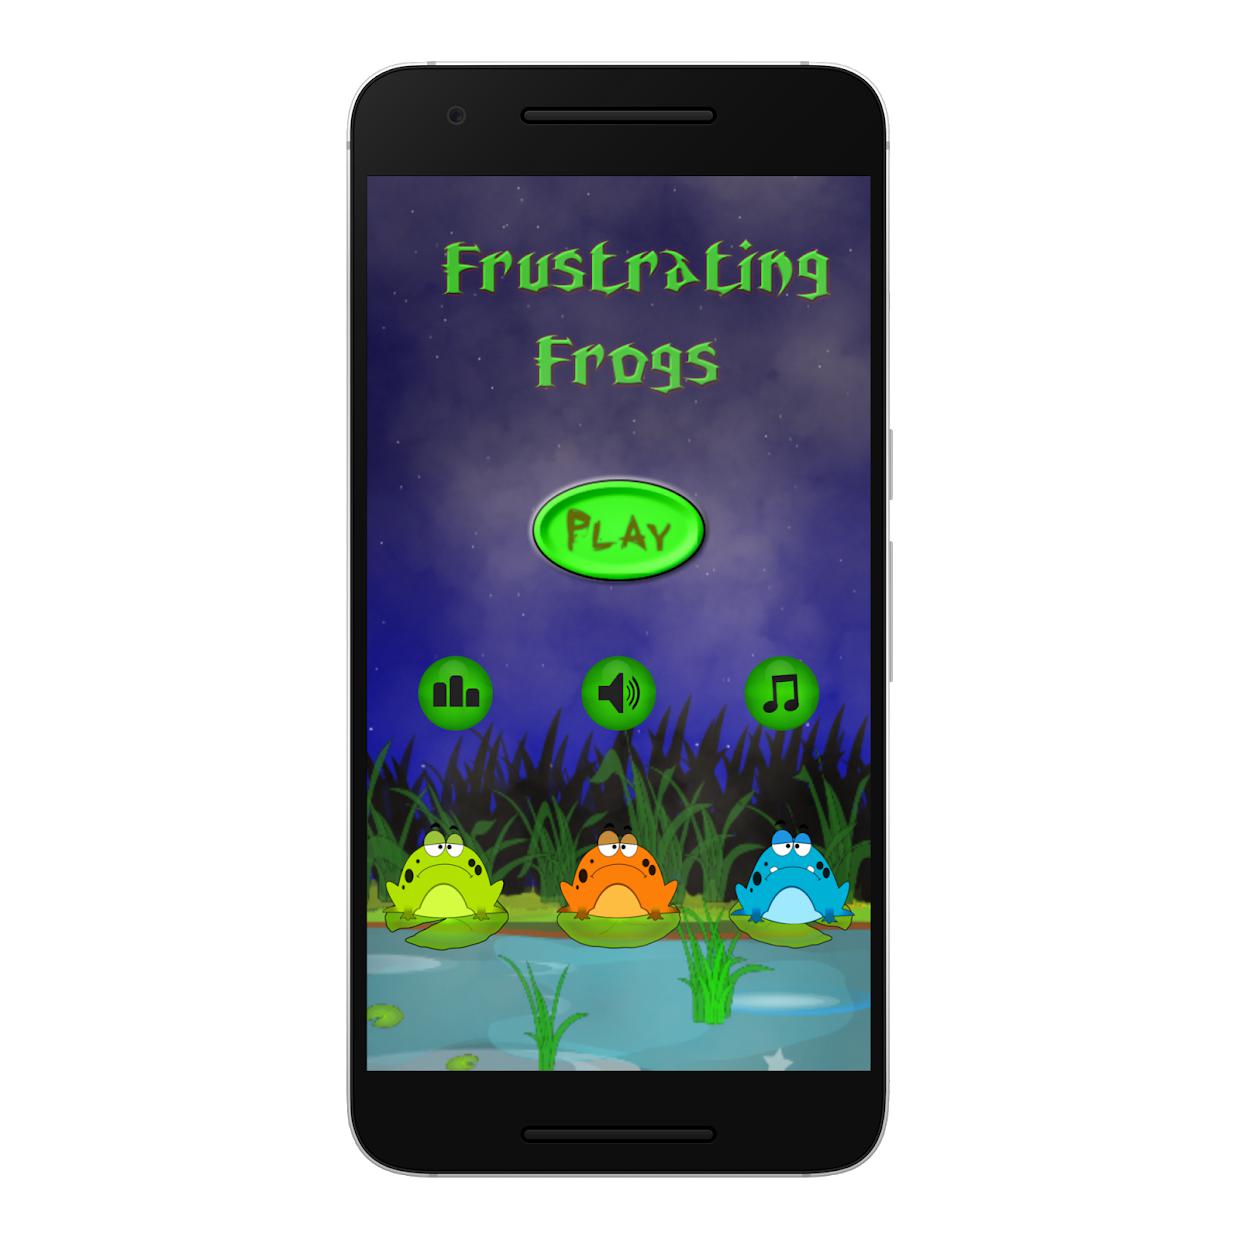 Frustrating Frogs